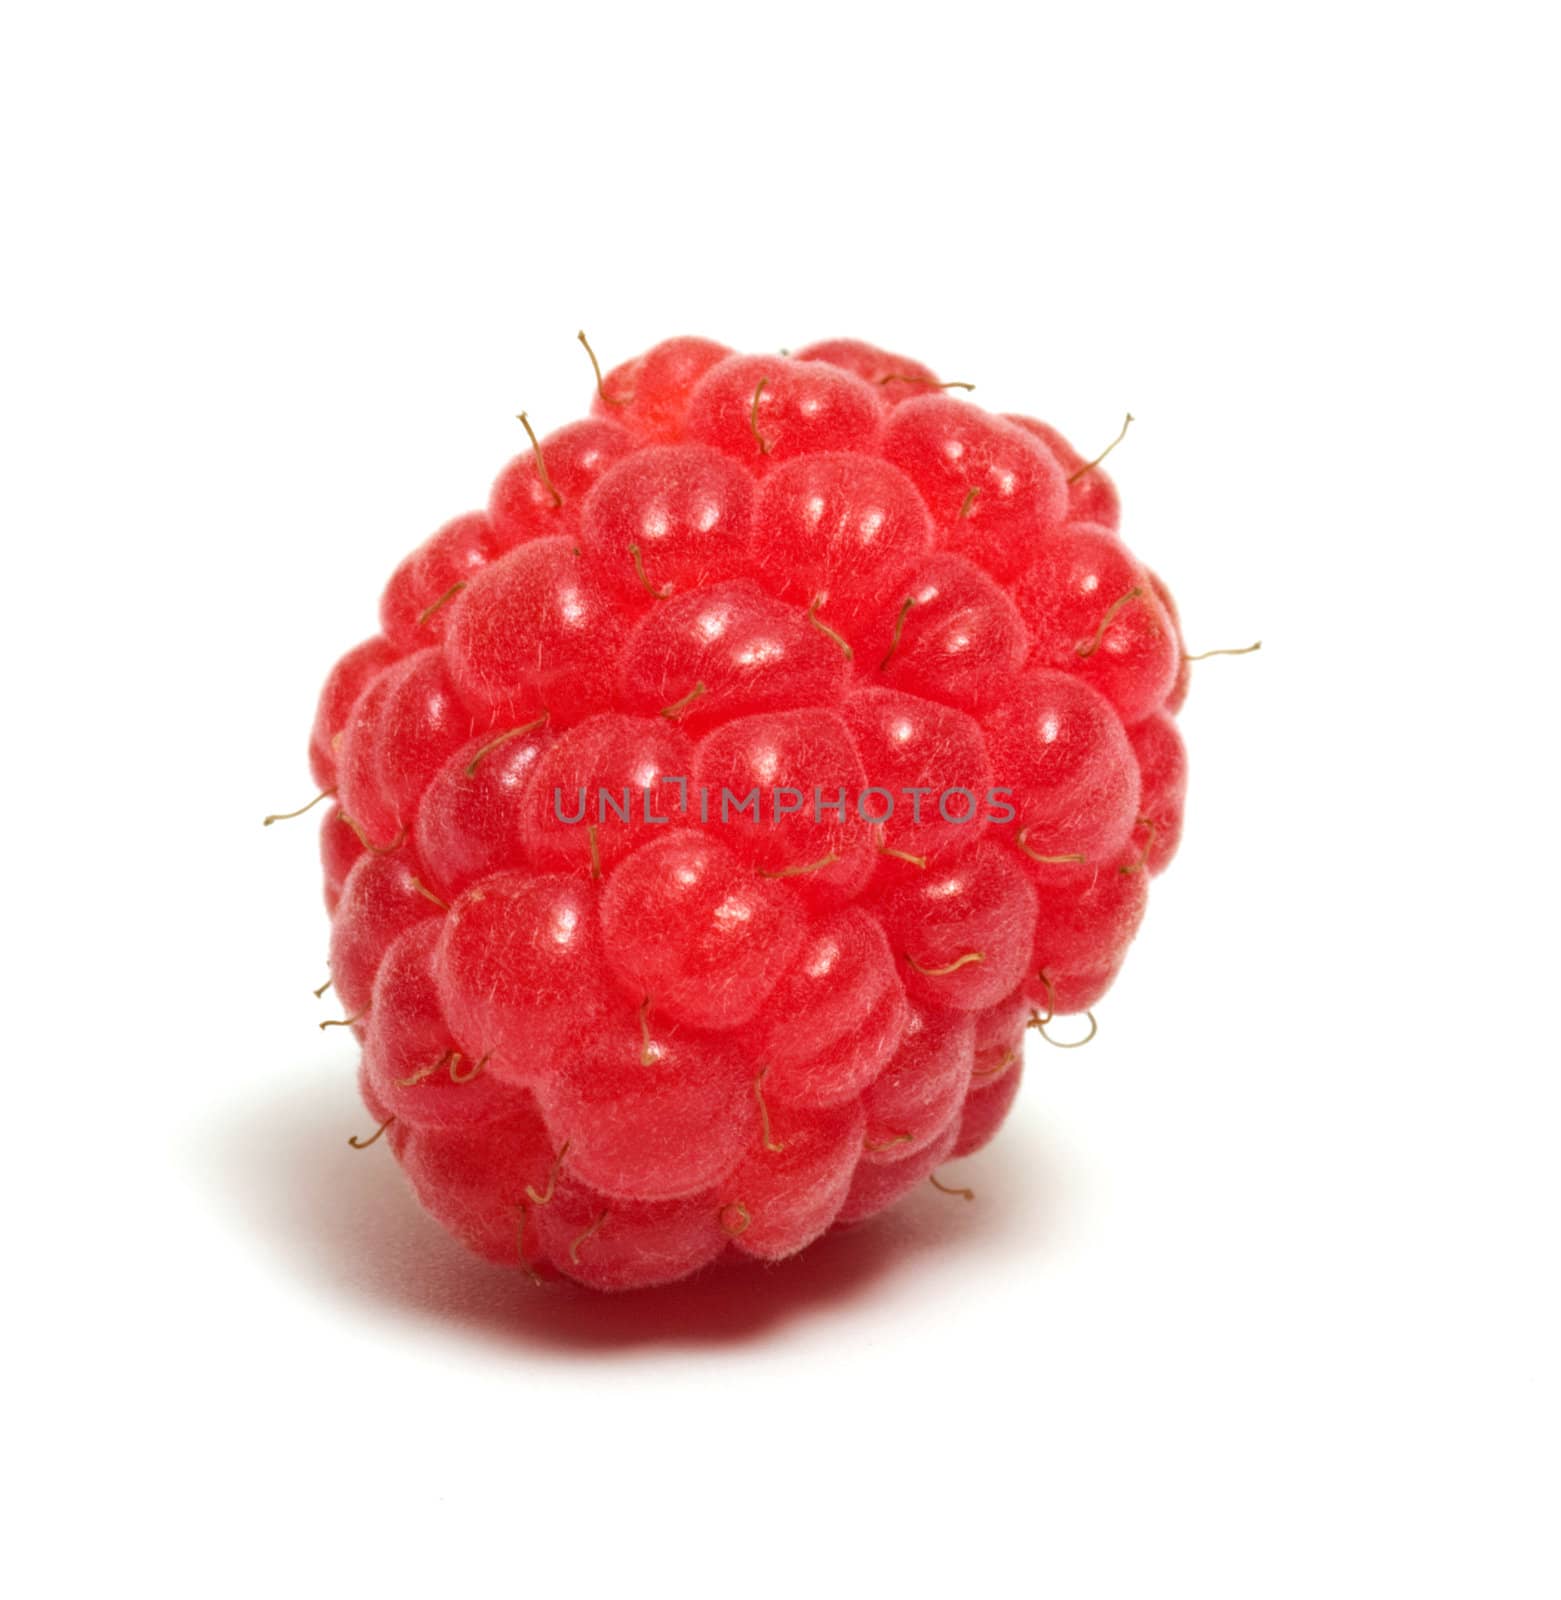 Raspberry closeup isolated on a white background.